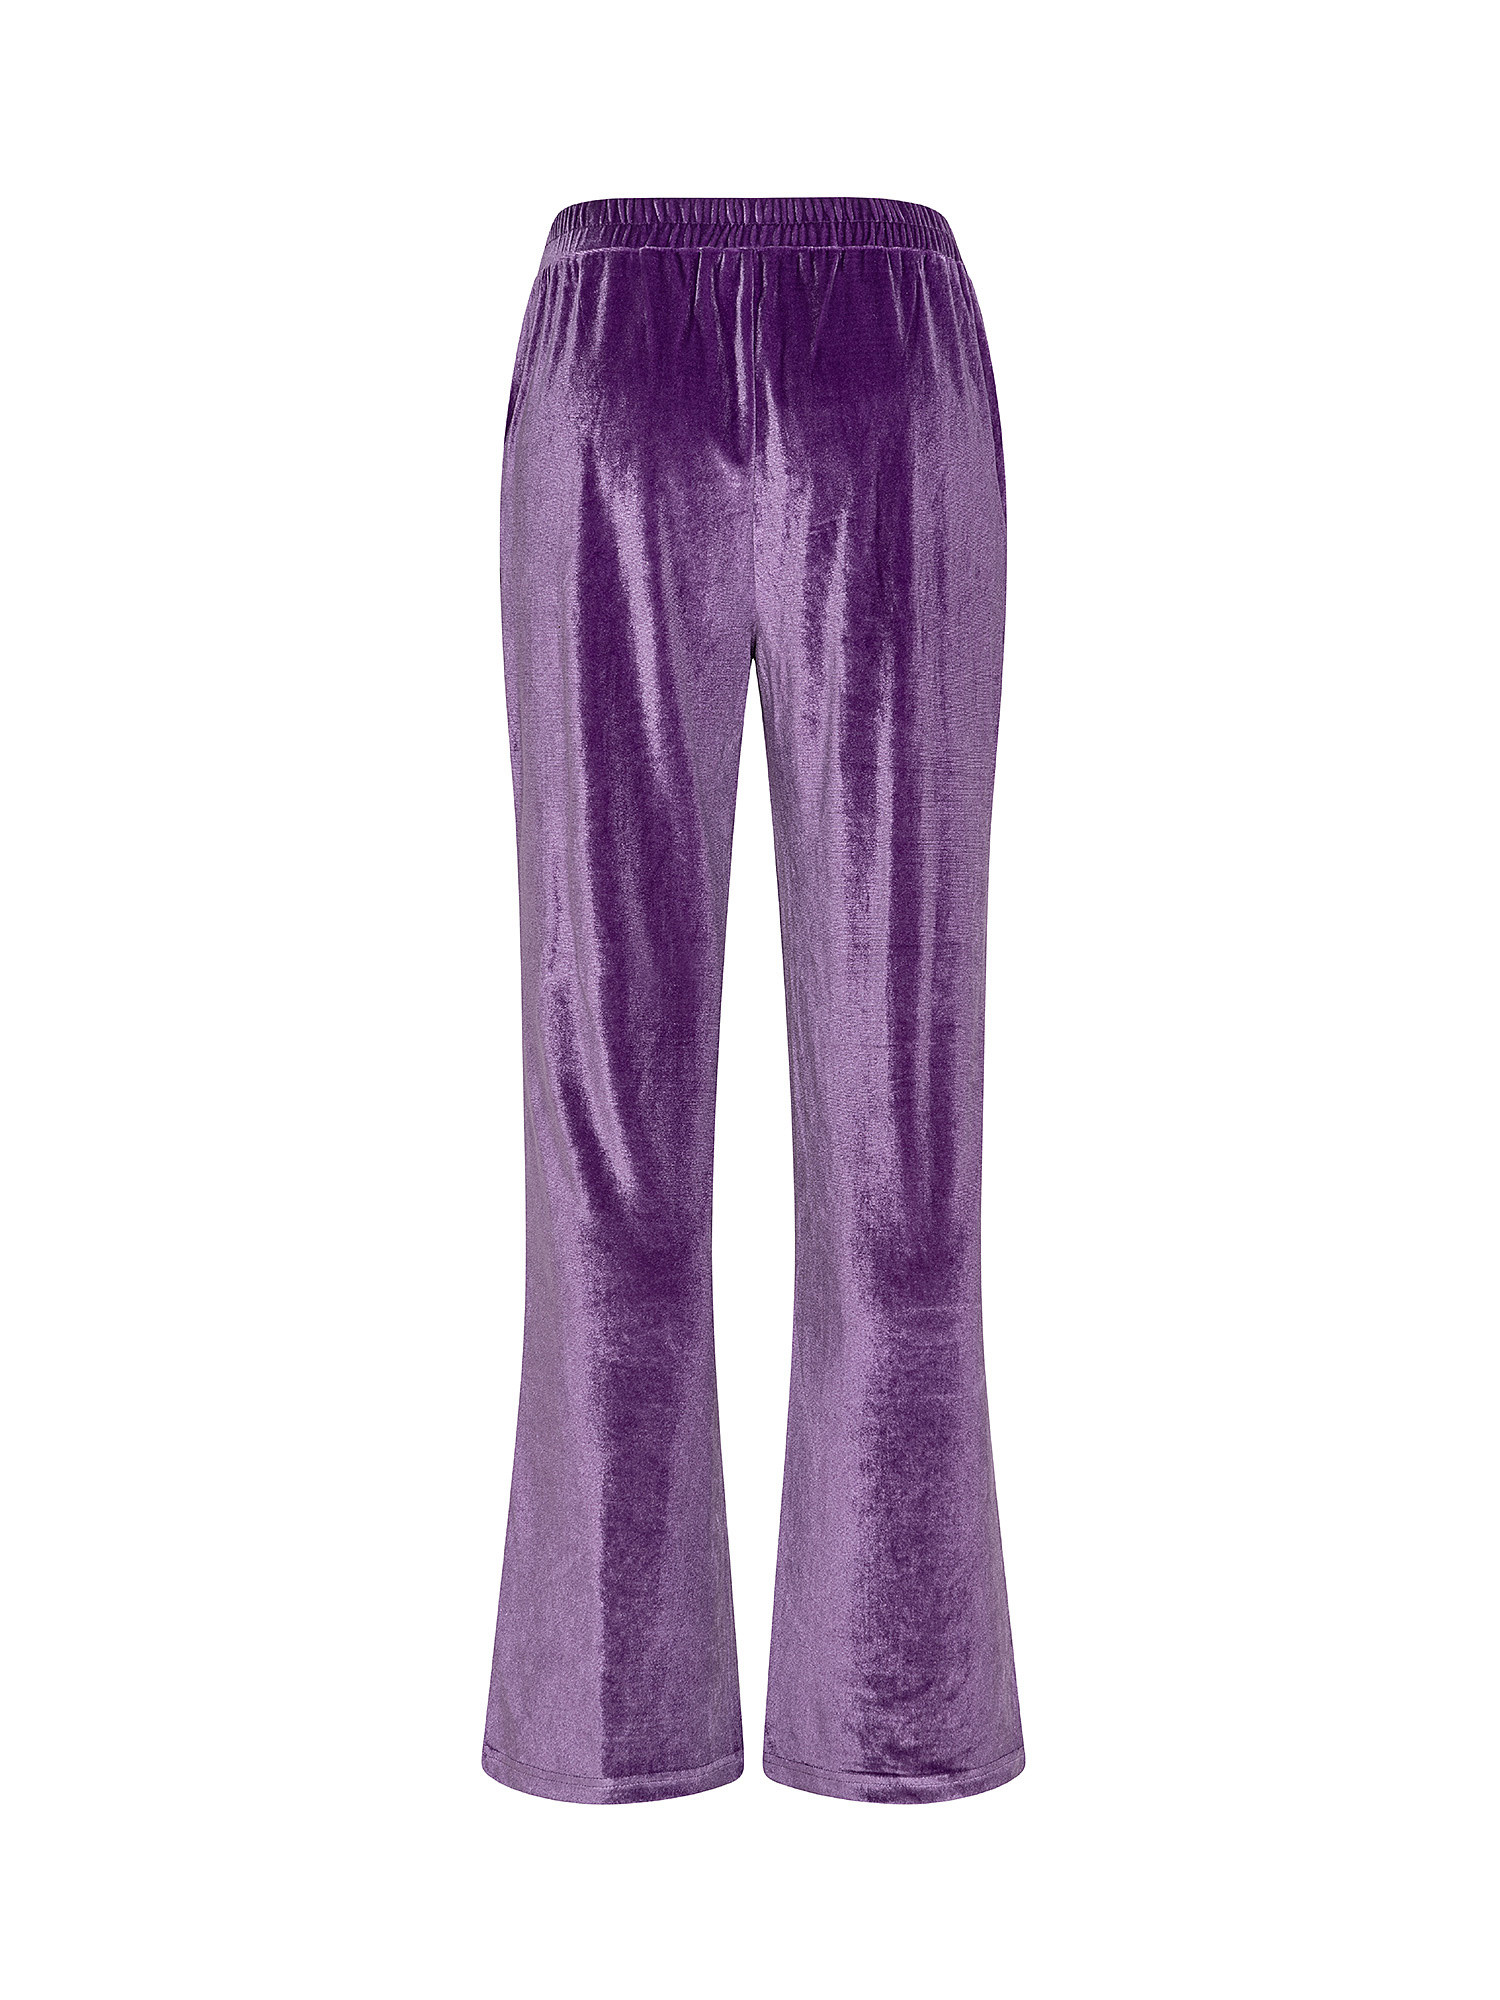 Velor trousers, Purple, large image number 1